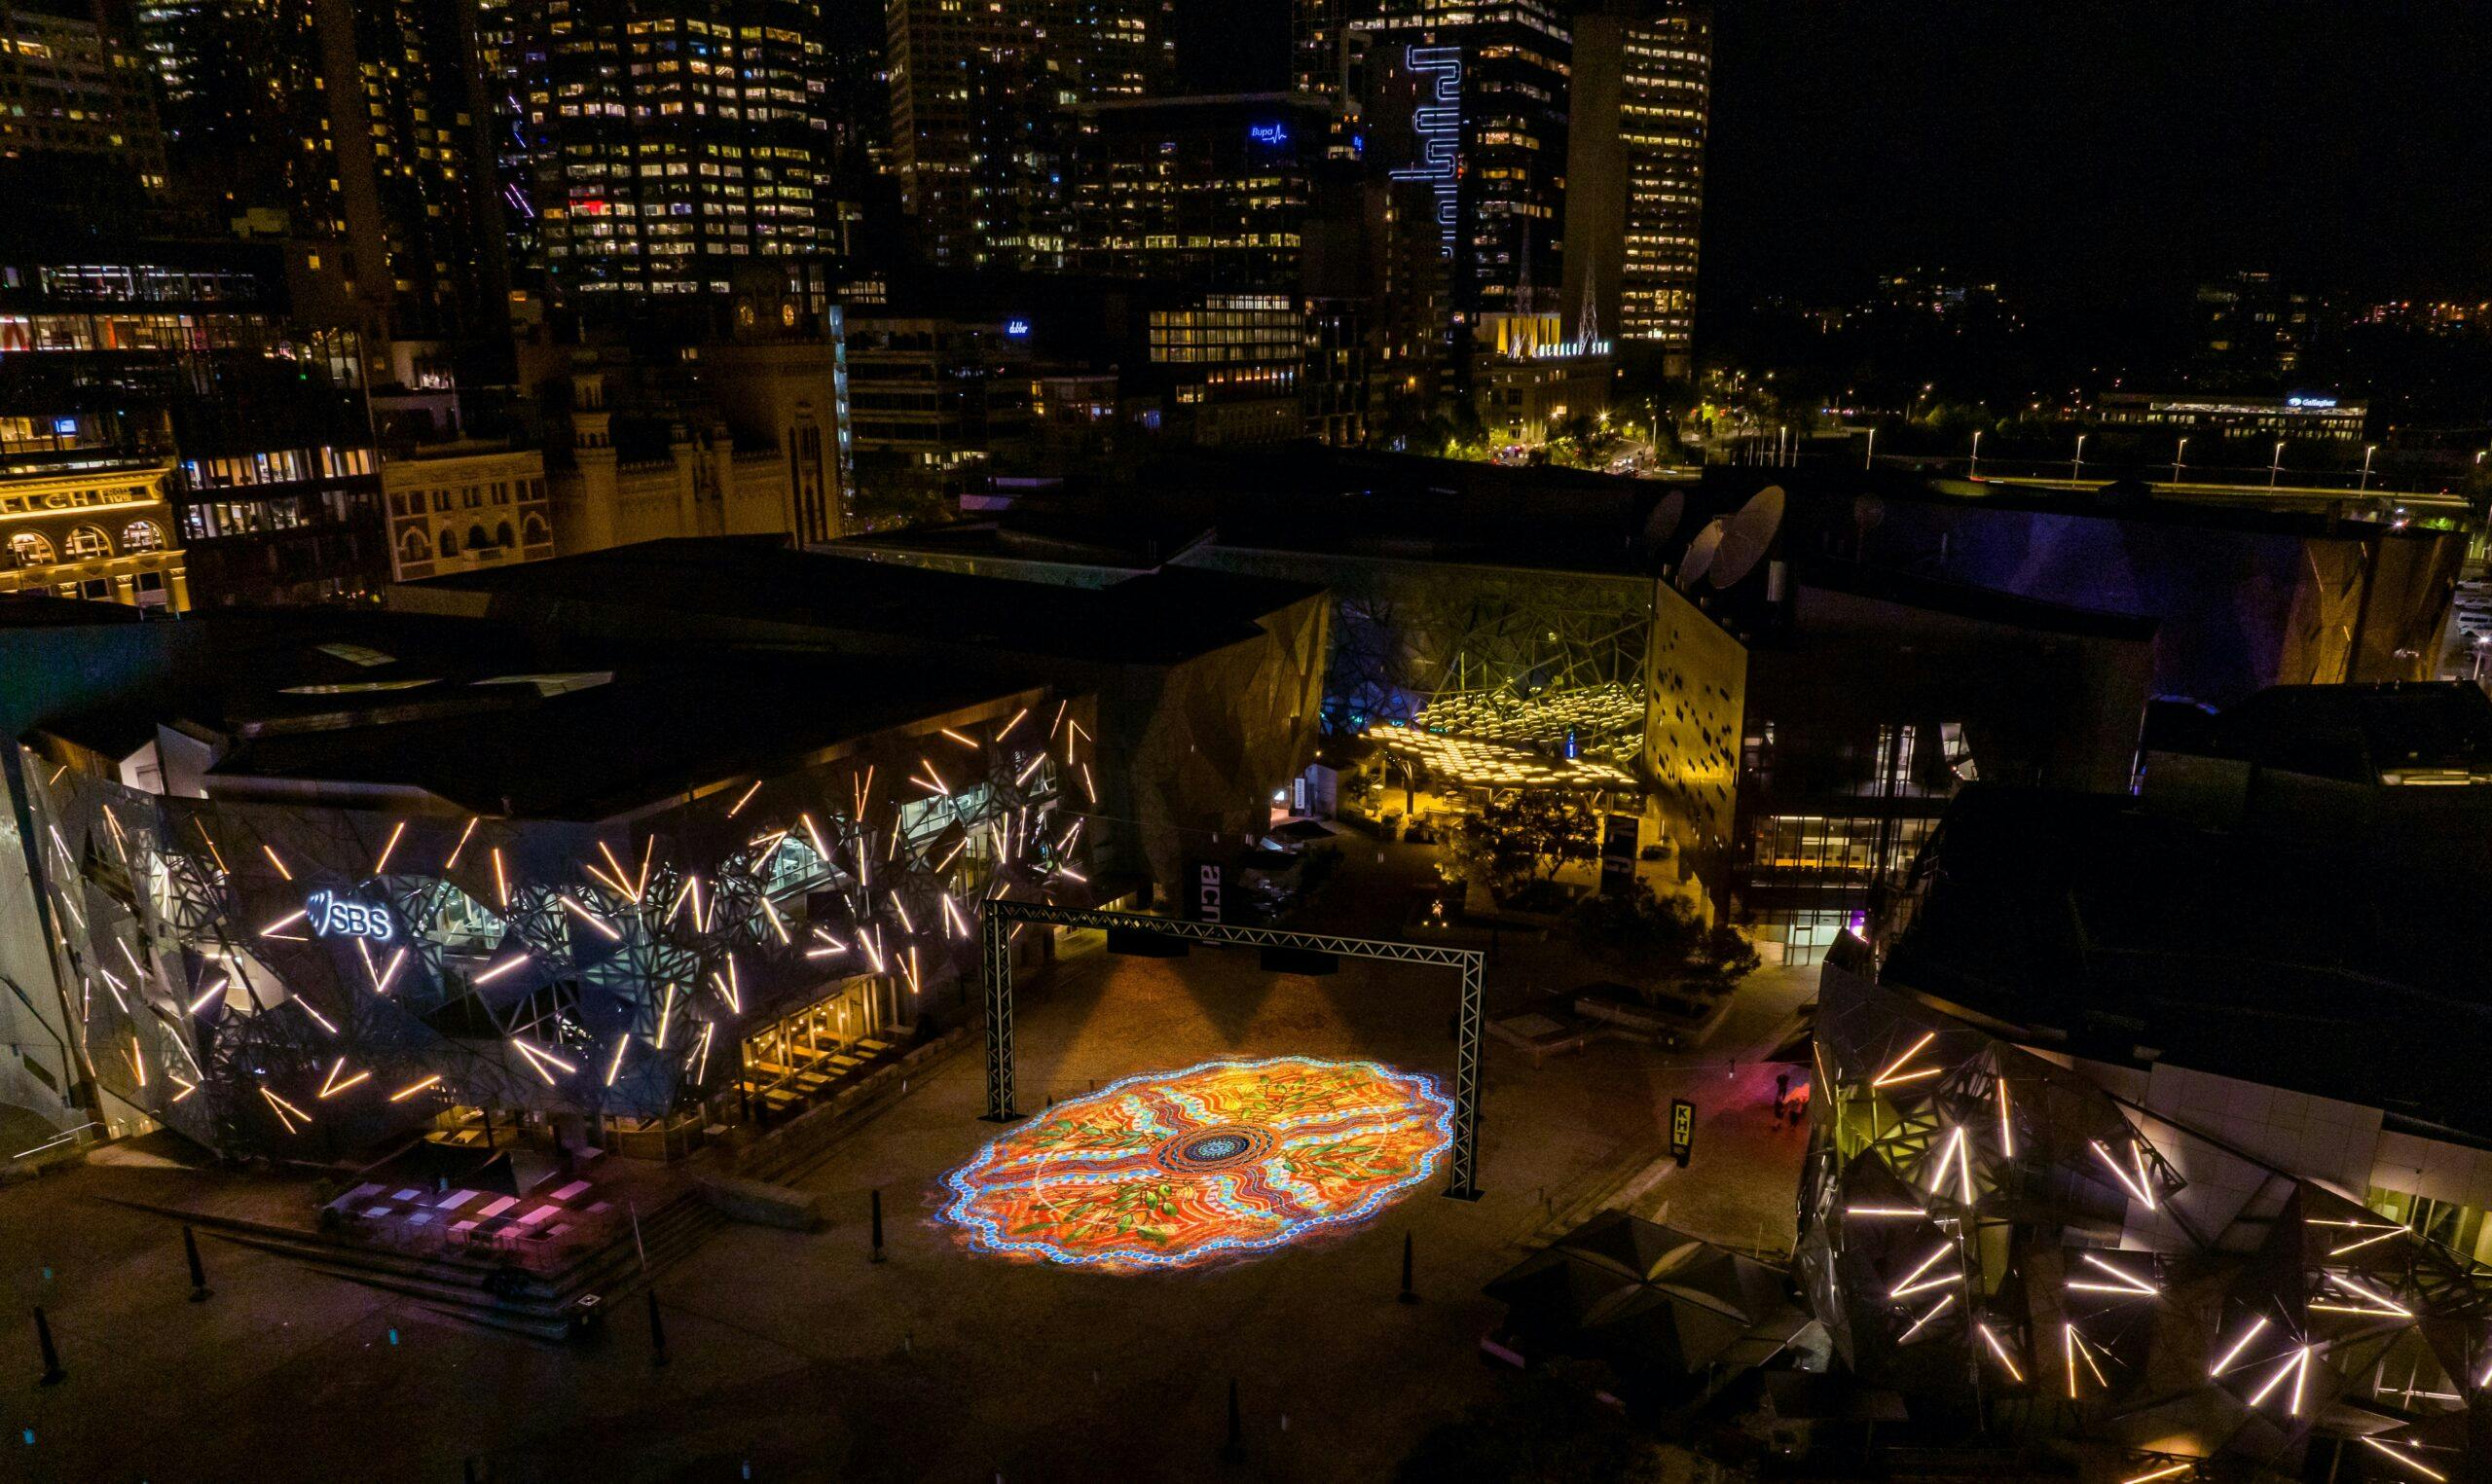 Parrtjima's Grounded installation will make an appearance at Melbourne's Fed Sq from 10-11 March 2023